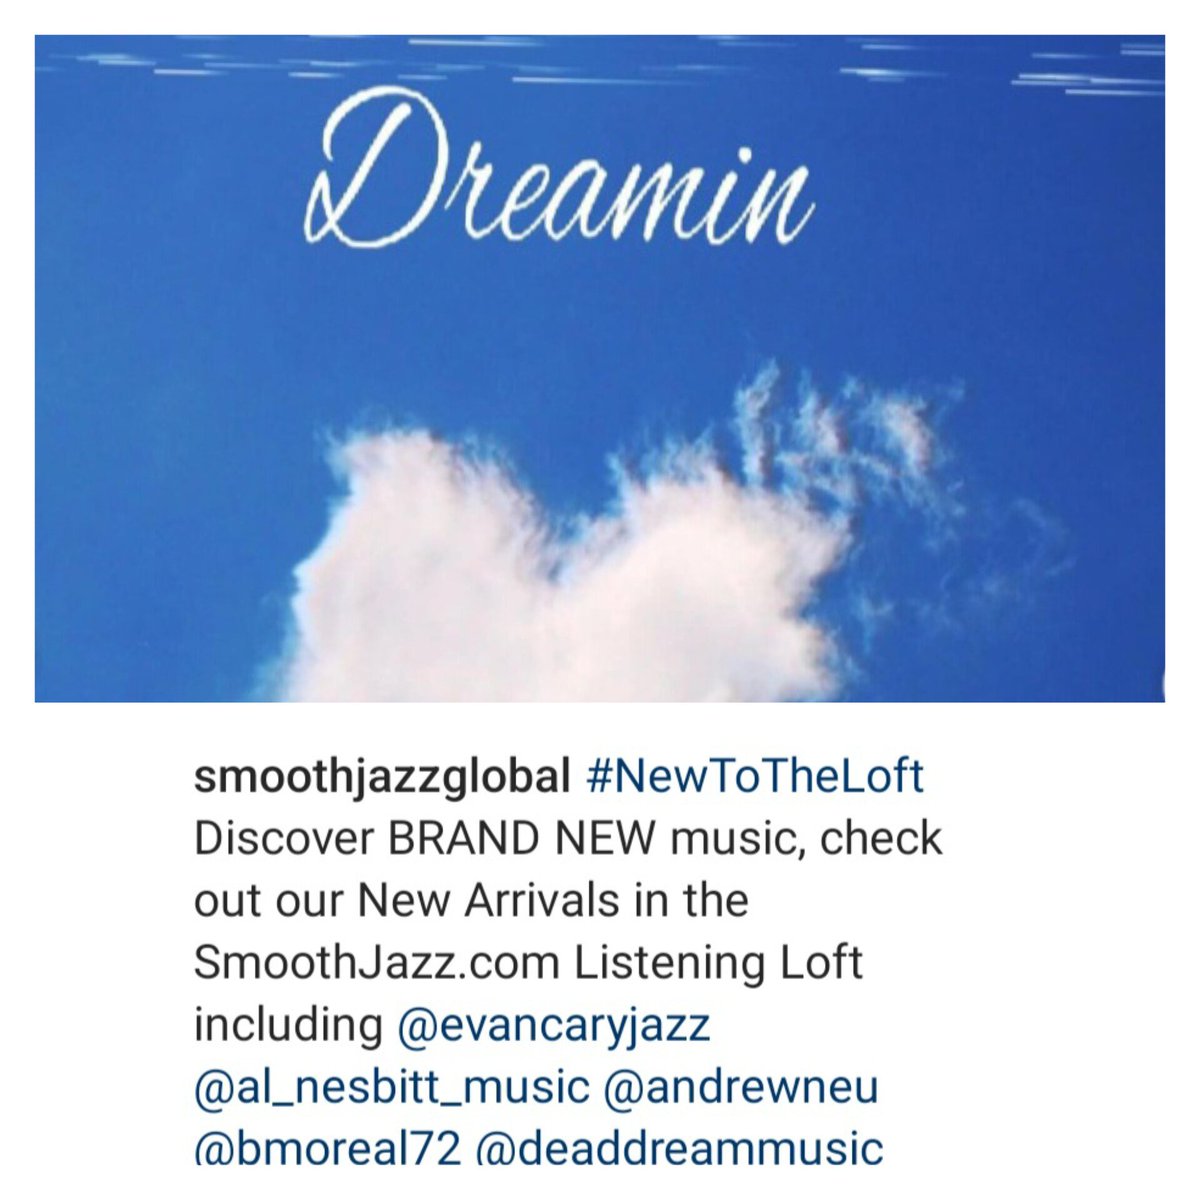 🙏🏽 Such an honor to have our NEW Album 'Dreamin' 🤍 added to the Smoothjazz Listening Loft @SmoothJazzRadio!!! Come join us & share the Vibe at the Loft! 🎧🎶   #grateful #newalbum #newarrivals #newmusic #newreleases #ListenUp #share #smoothjazz #jazzfunk #jazz #fusion #thankful